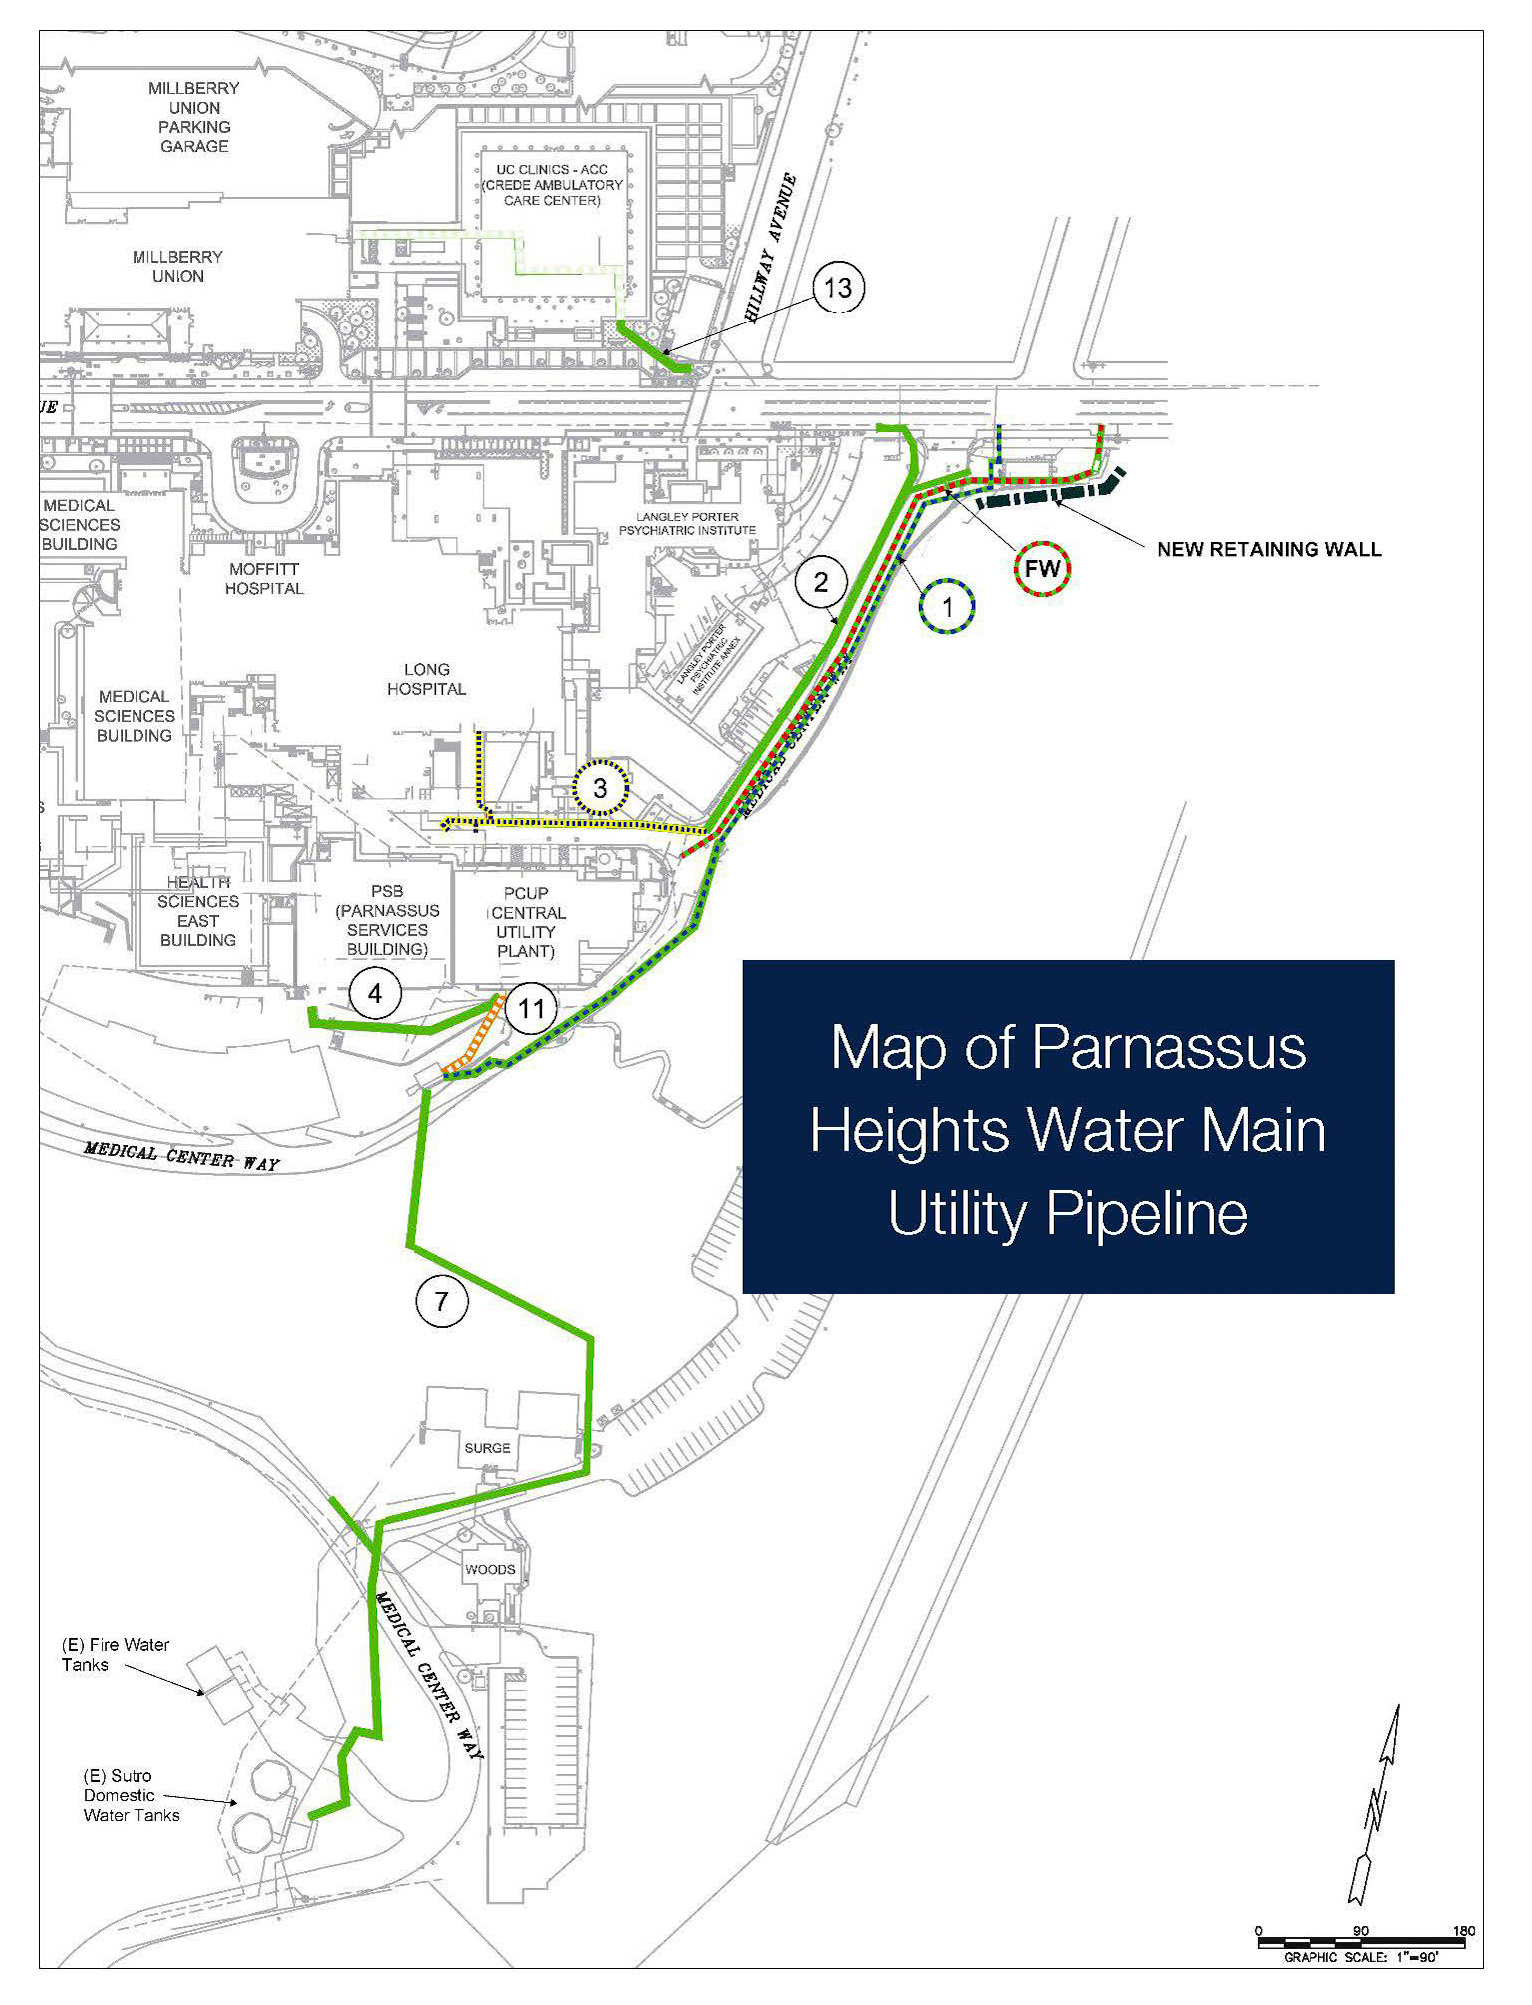 Map of Parnassus Heights Water Main Utility Pipeline